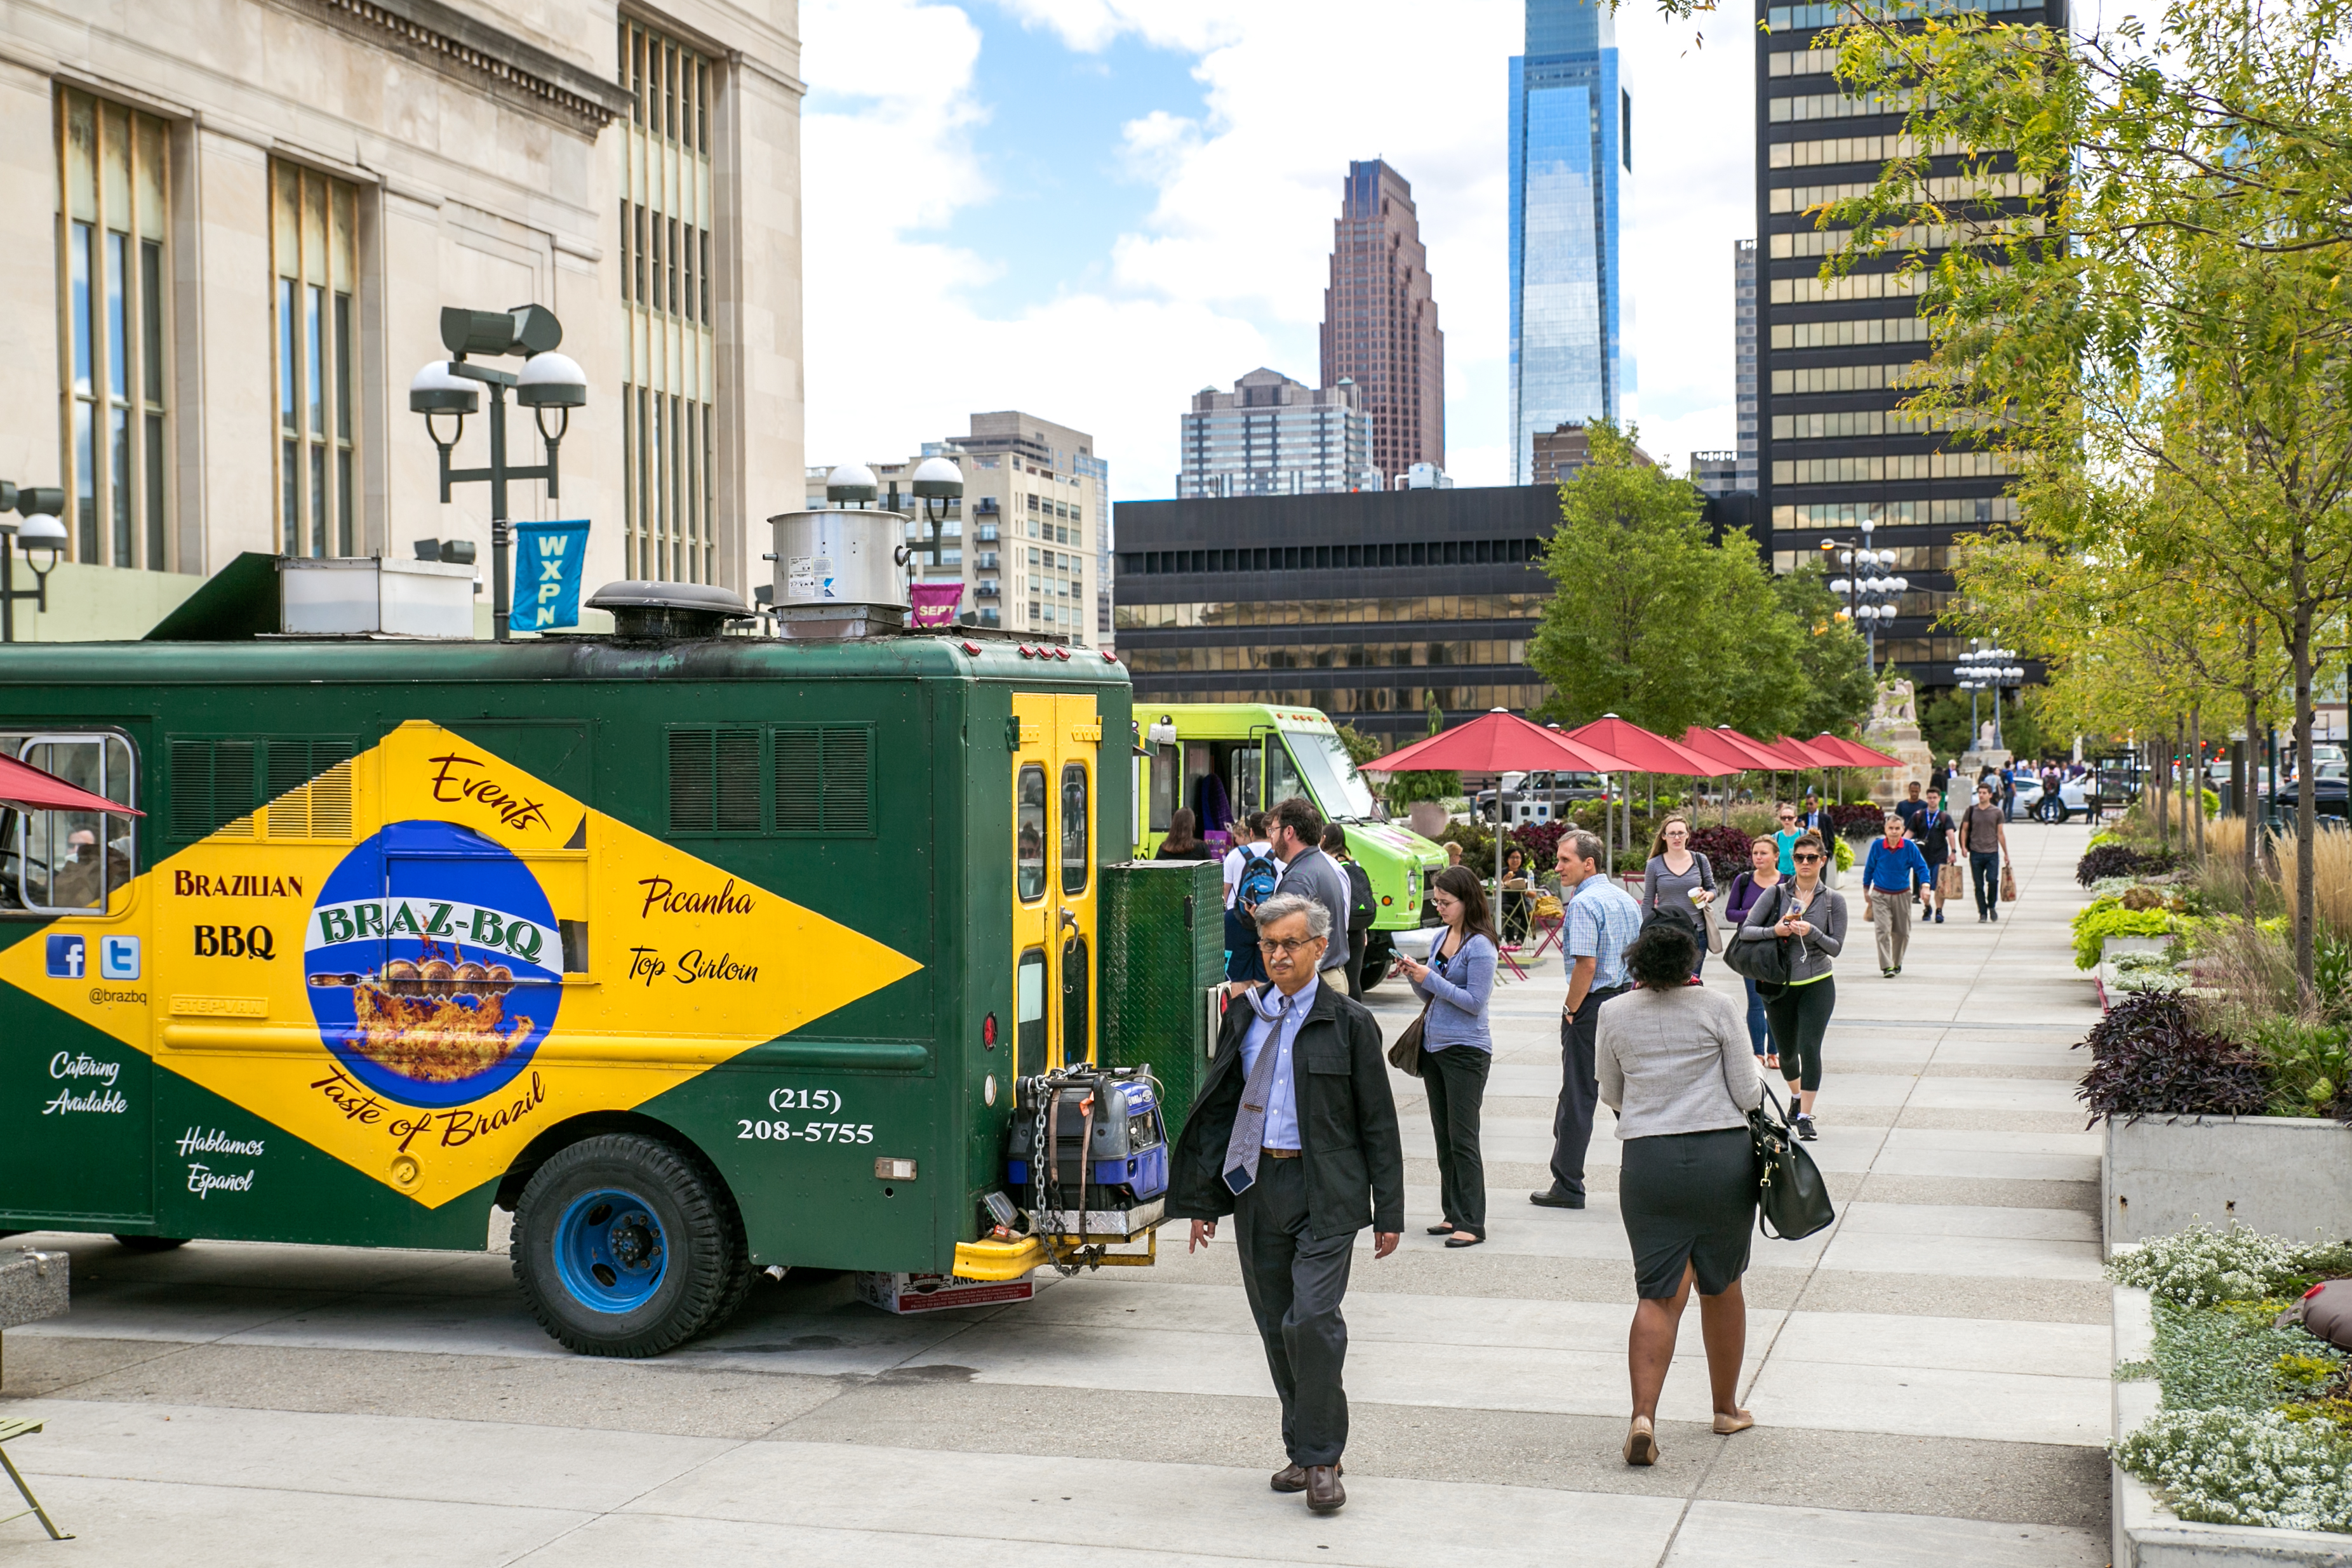 Additional seating and food trucks draw steady daily visitors